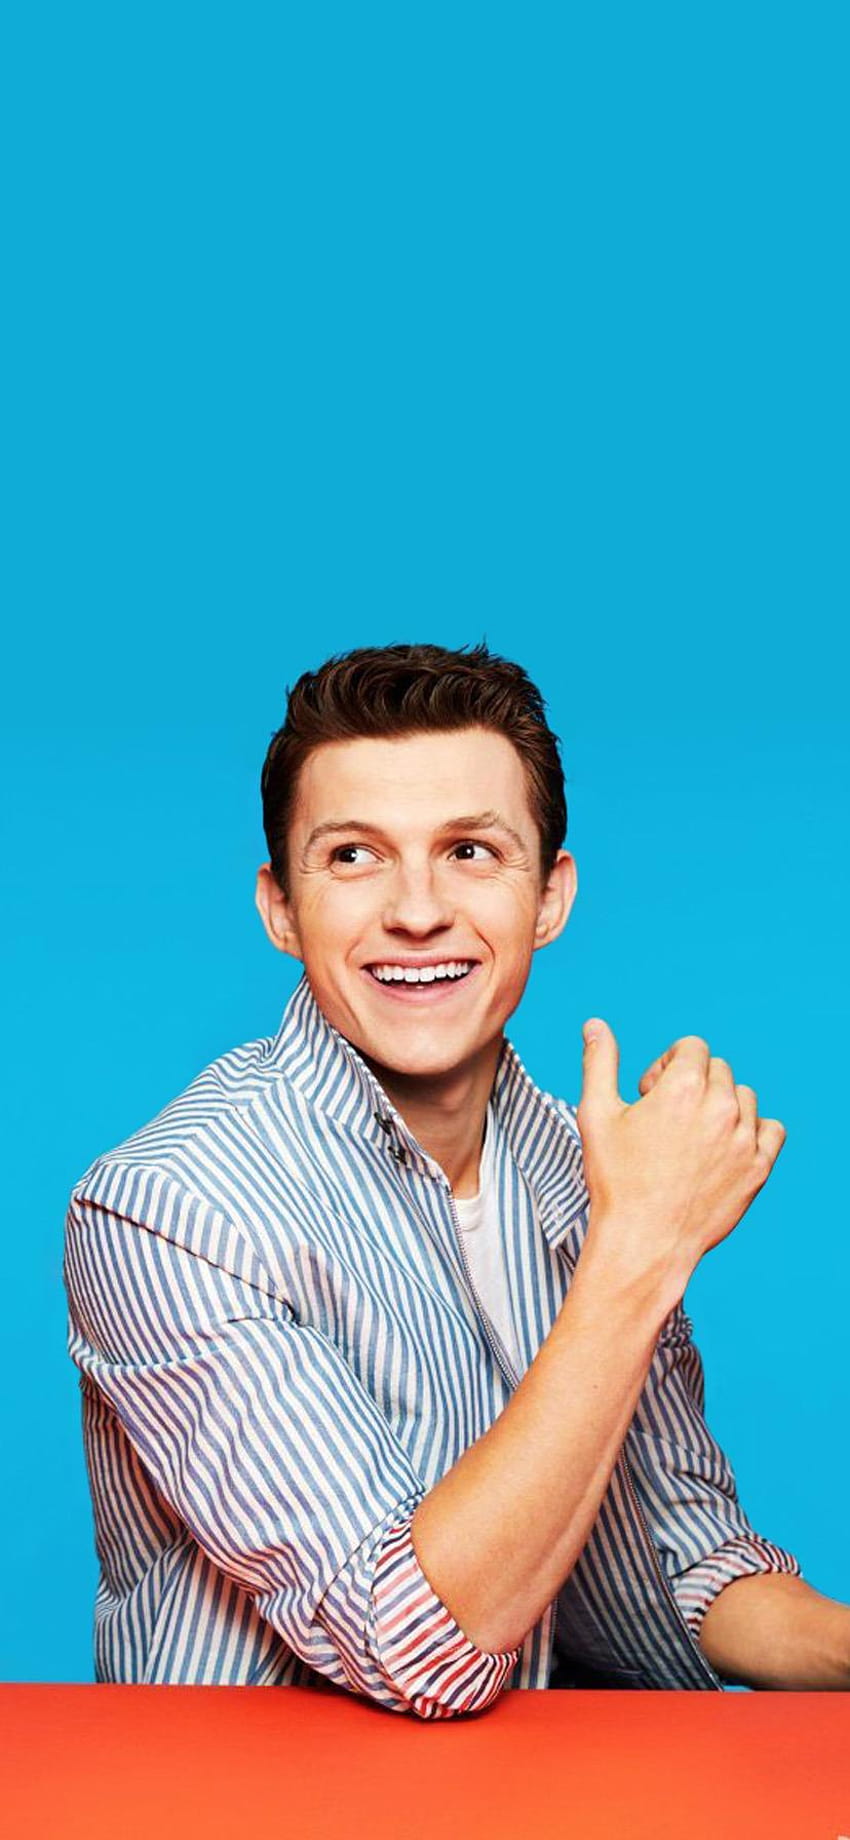 Oh, we're using our made, tom holland iphone tumblr HD phone wallpaper